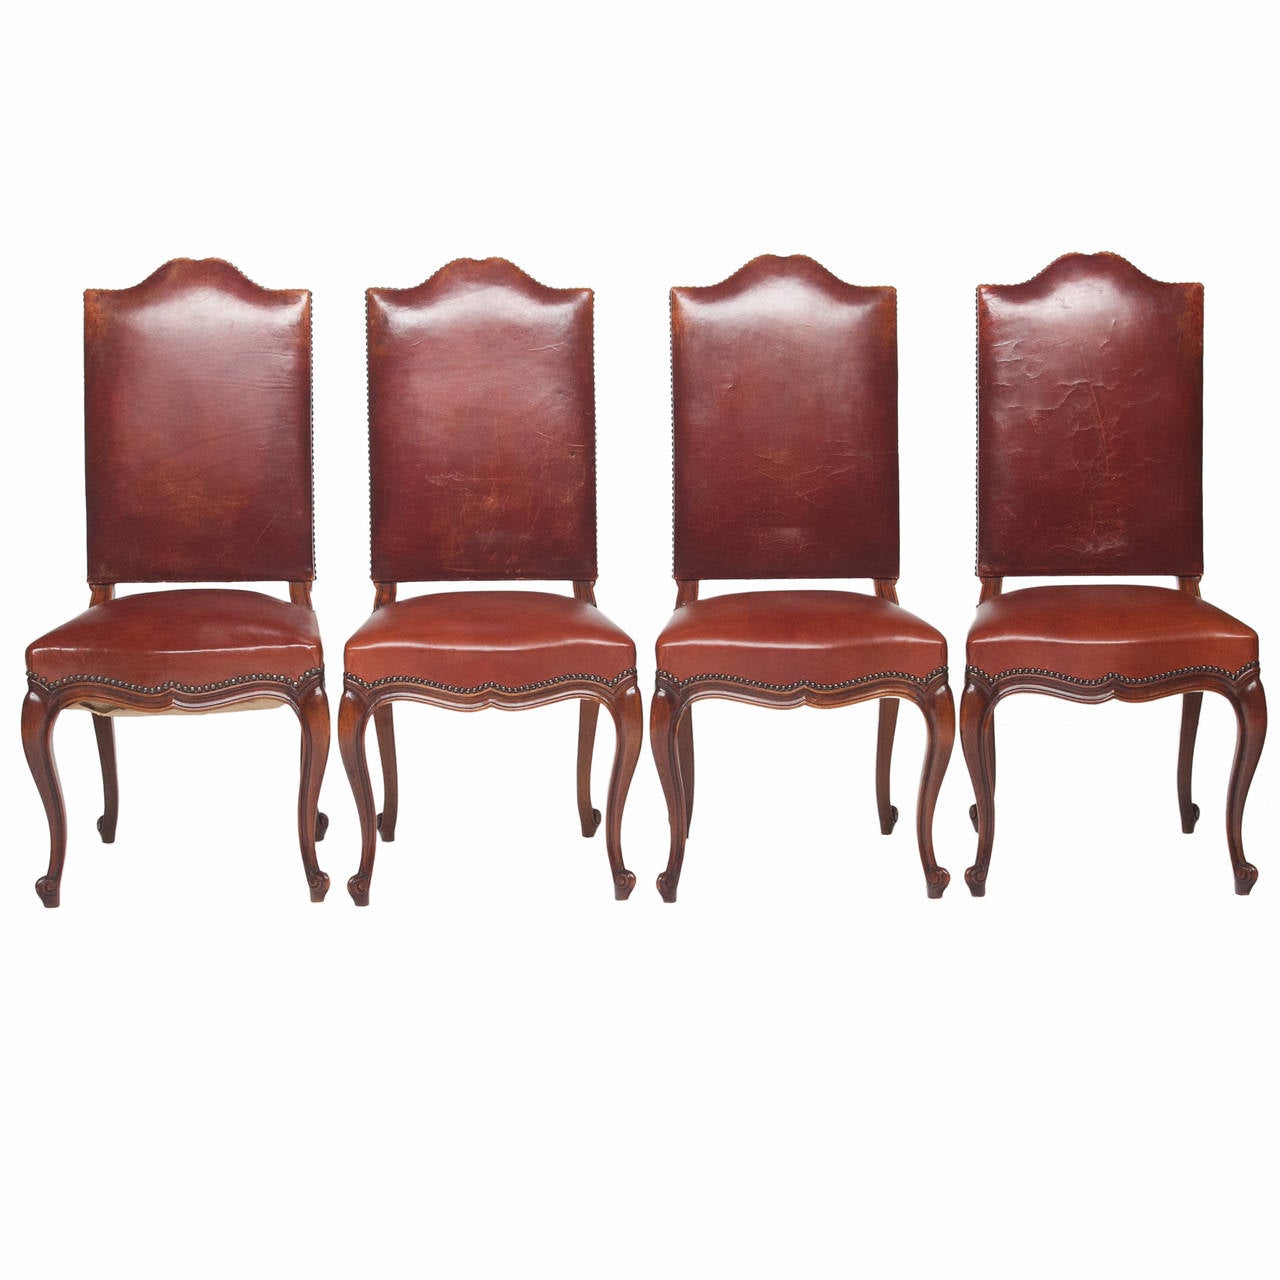 An admirable set of eight Louis XV walnut dining chairs with a distinct shaped crest of the chairs. The backs are all original leather and one seat. The rest have been recovered with a high quality leather. These chairs have a wonderful patina. The